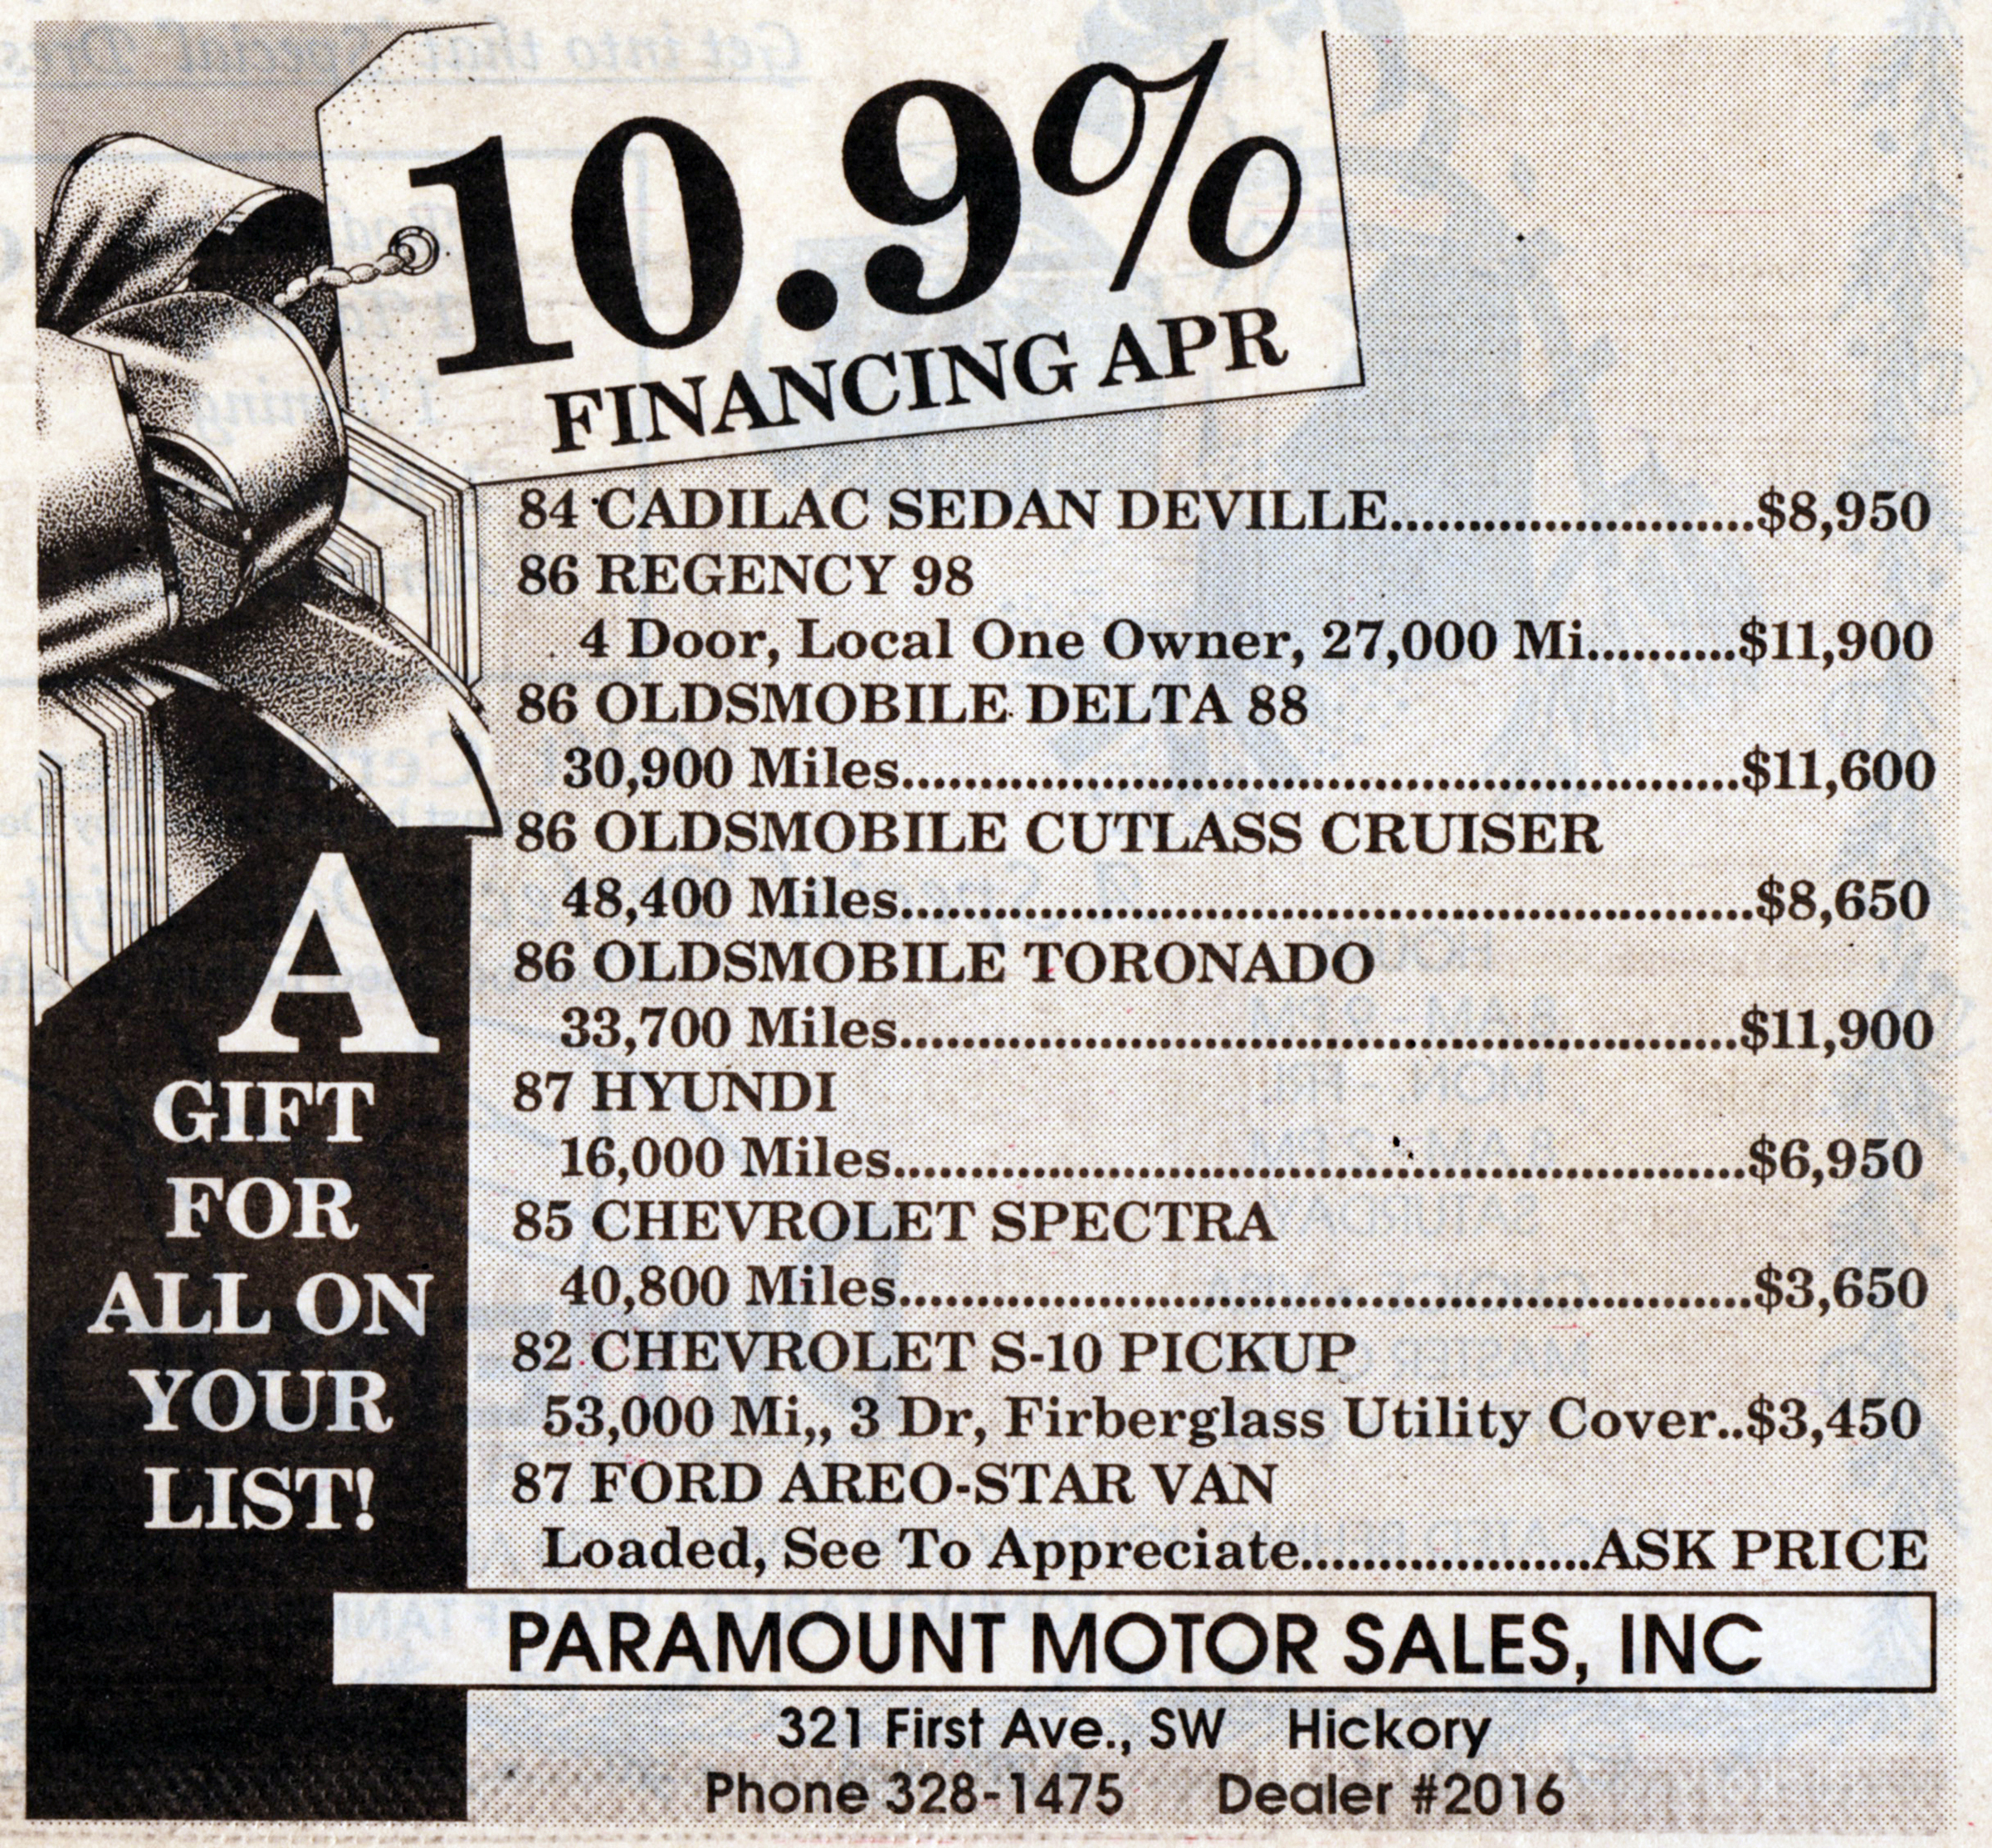 Advertisement for Paramount Motor Sales, Inc. published December 8, 1988.